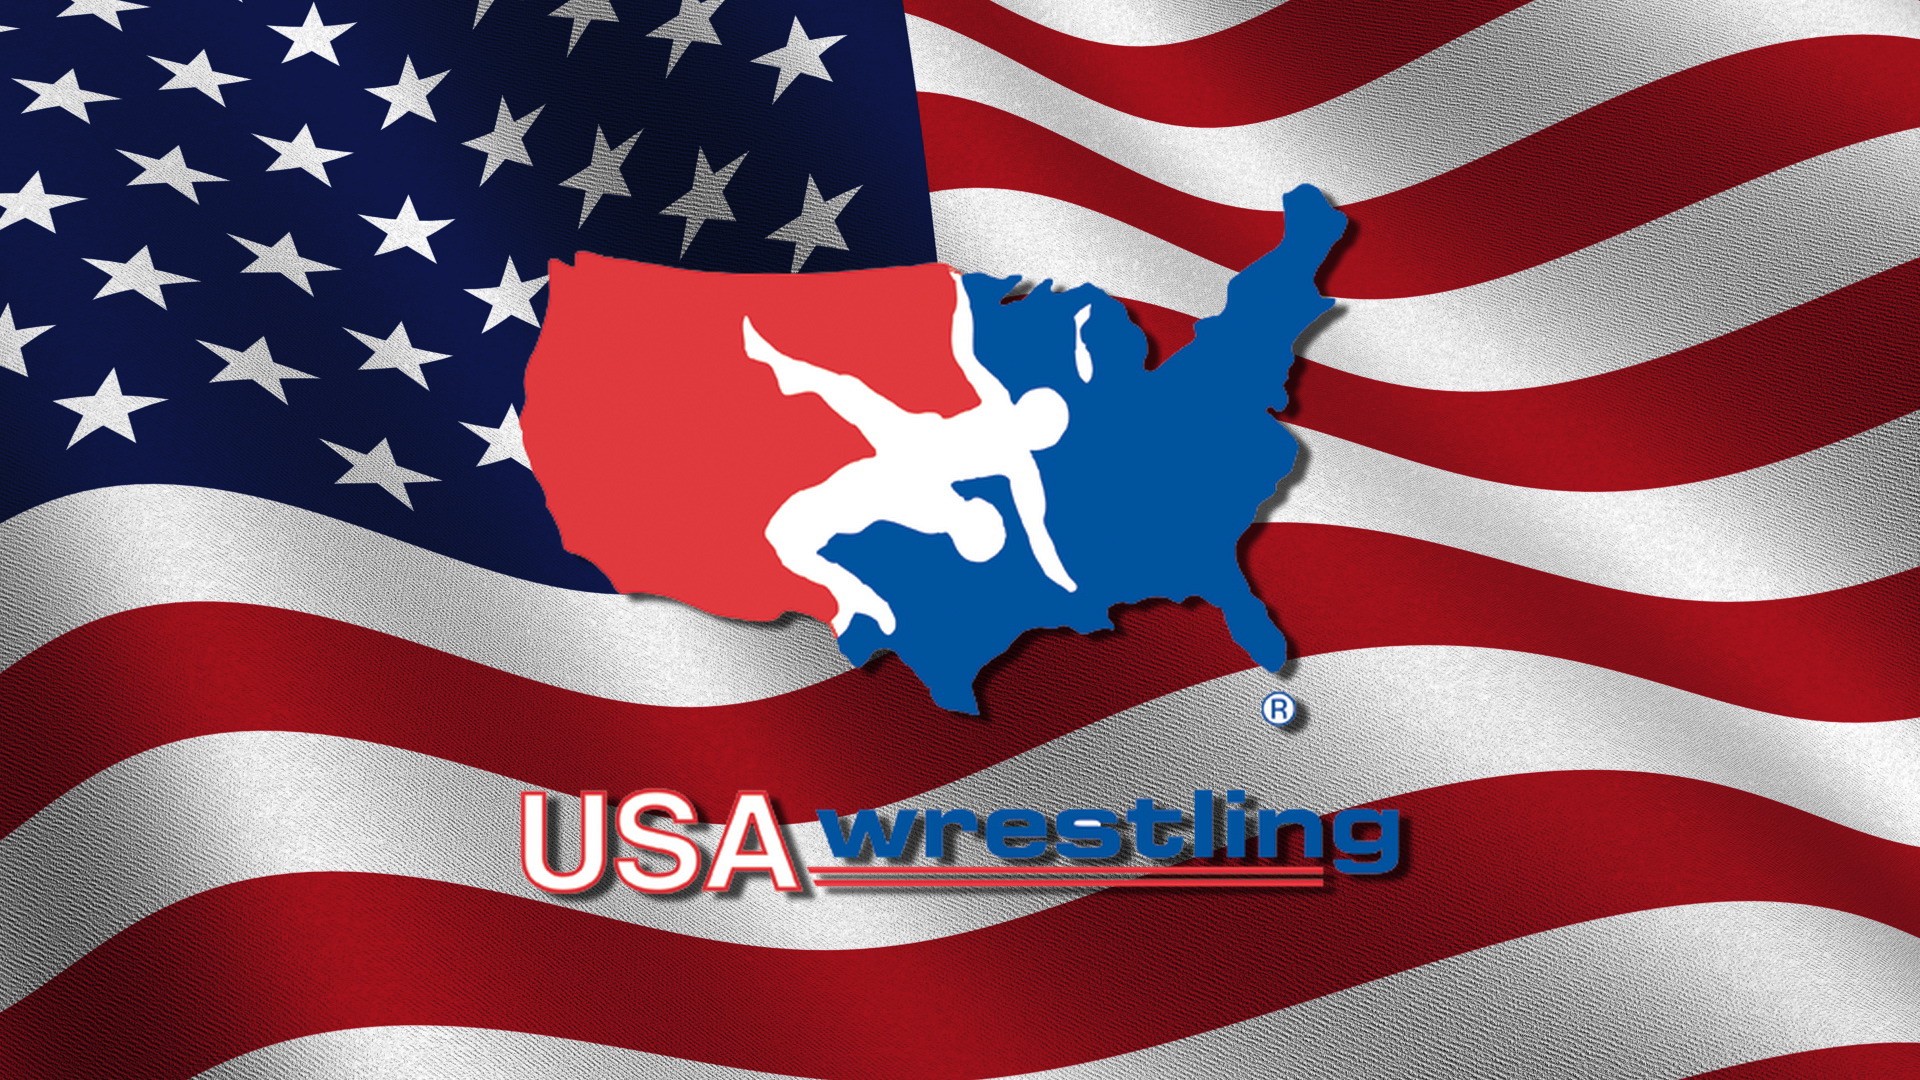 USA Wrestling requires background checks and online training for  journalists APSE pushes back